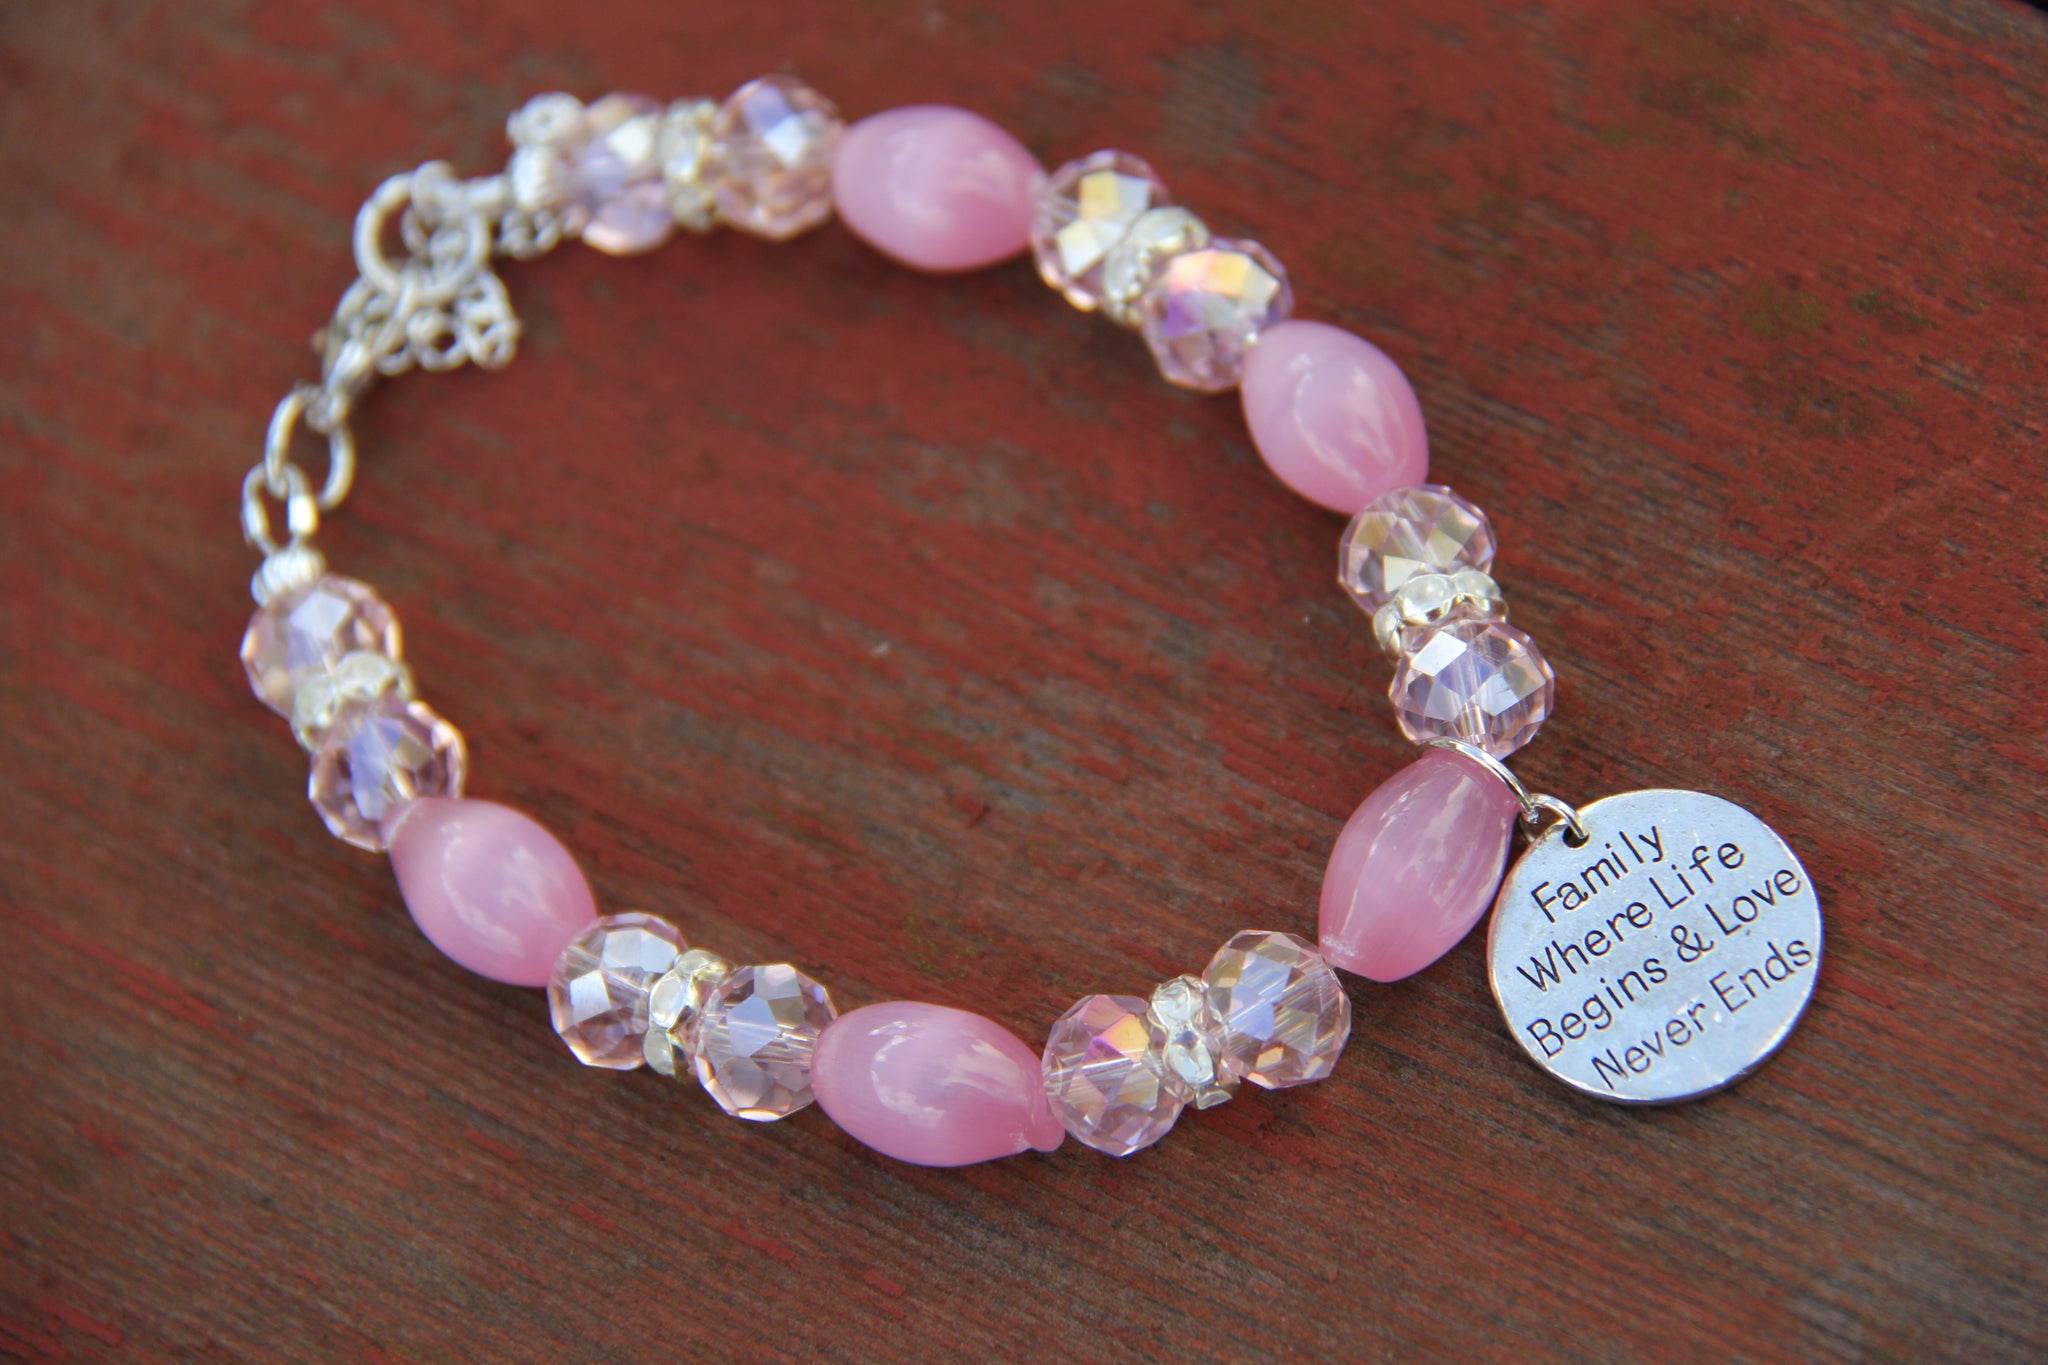  Pink glass beads and a silver charm for bottle bracelet